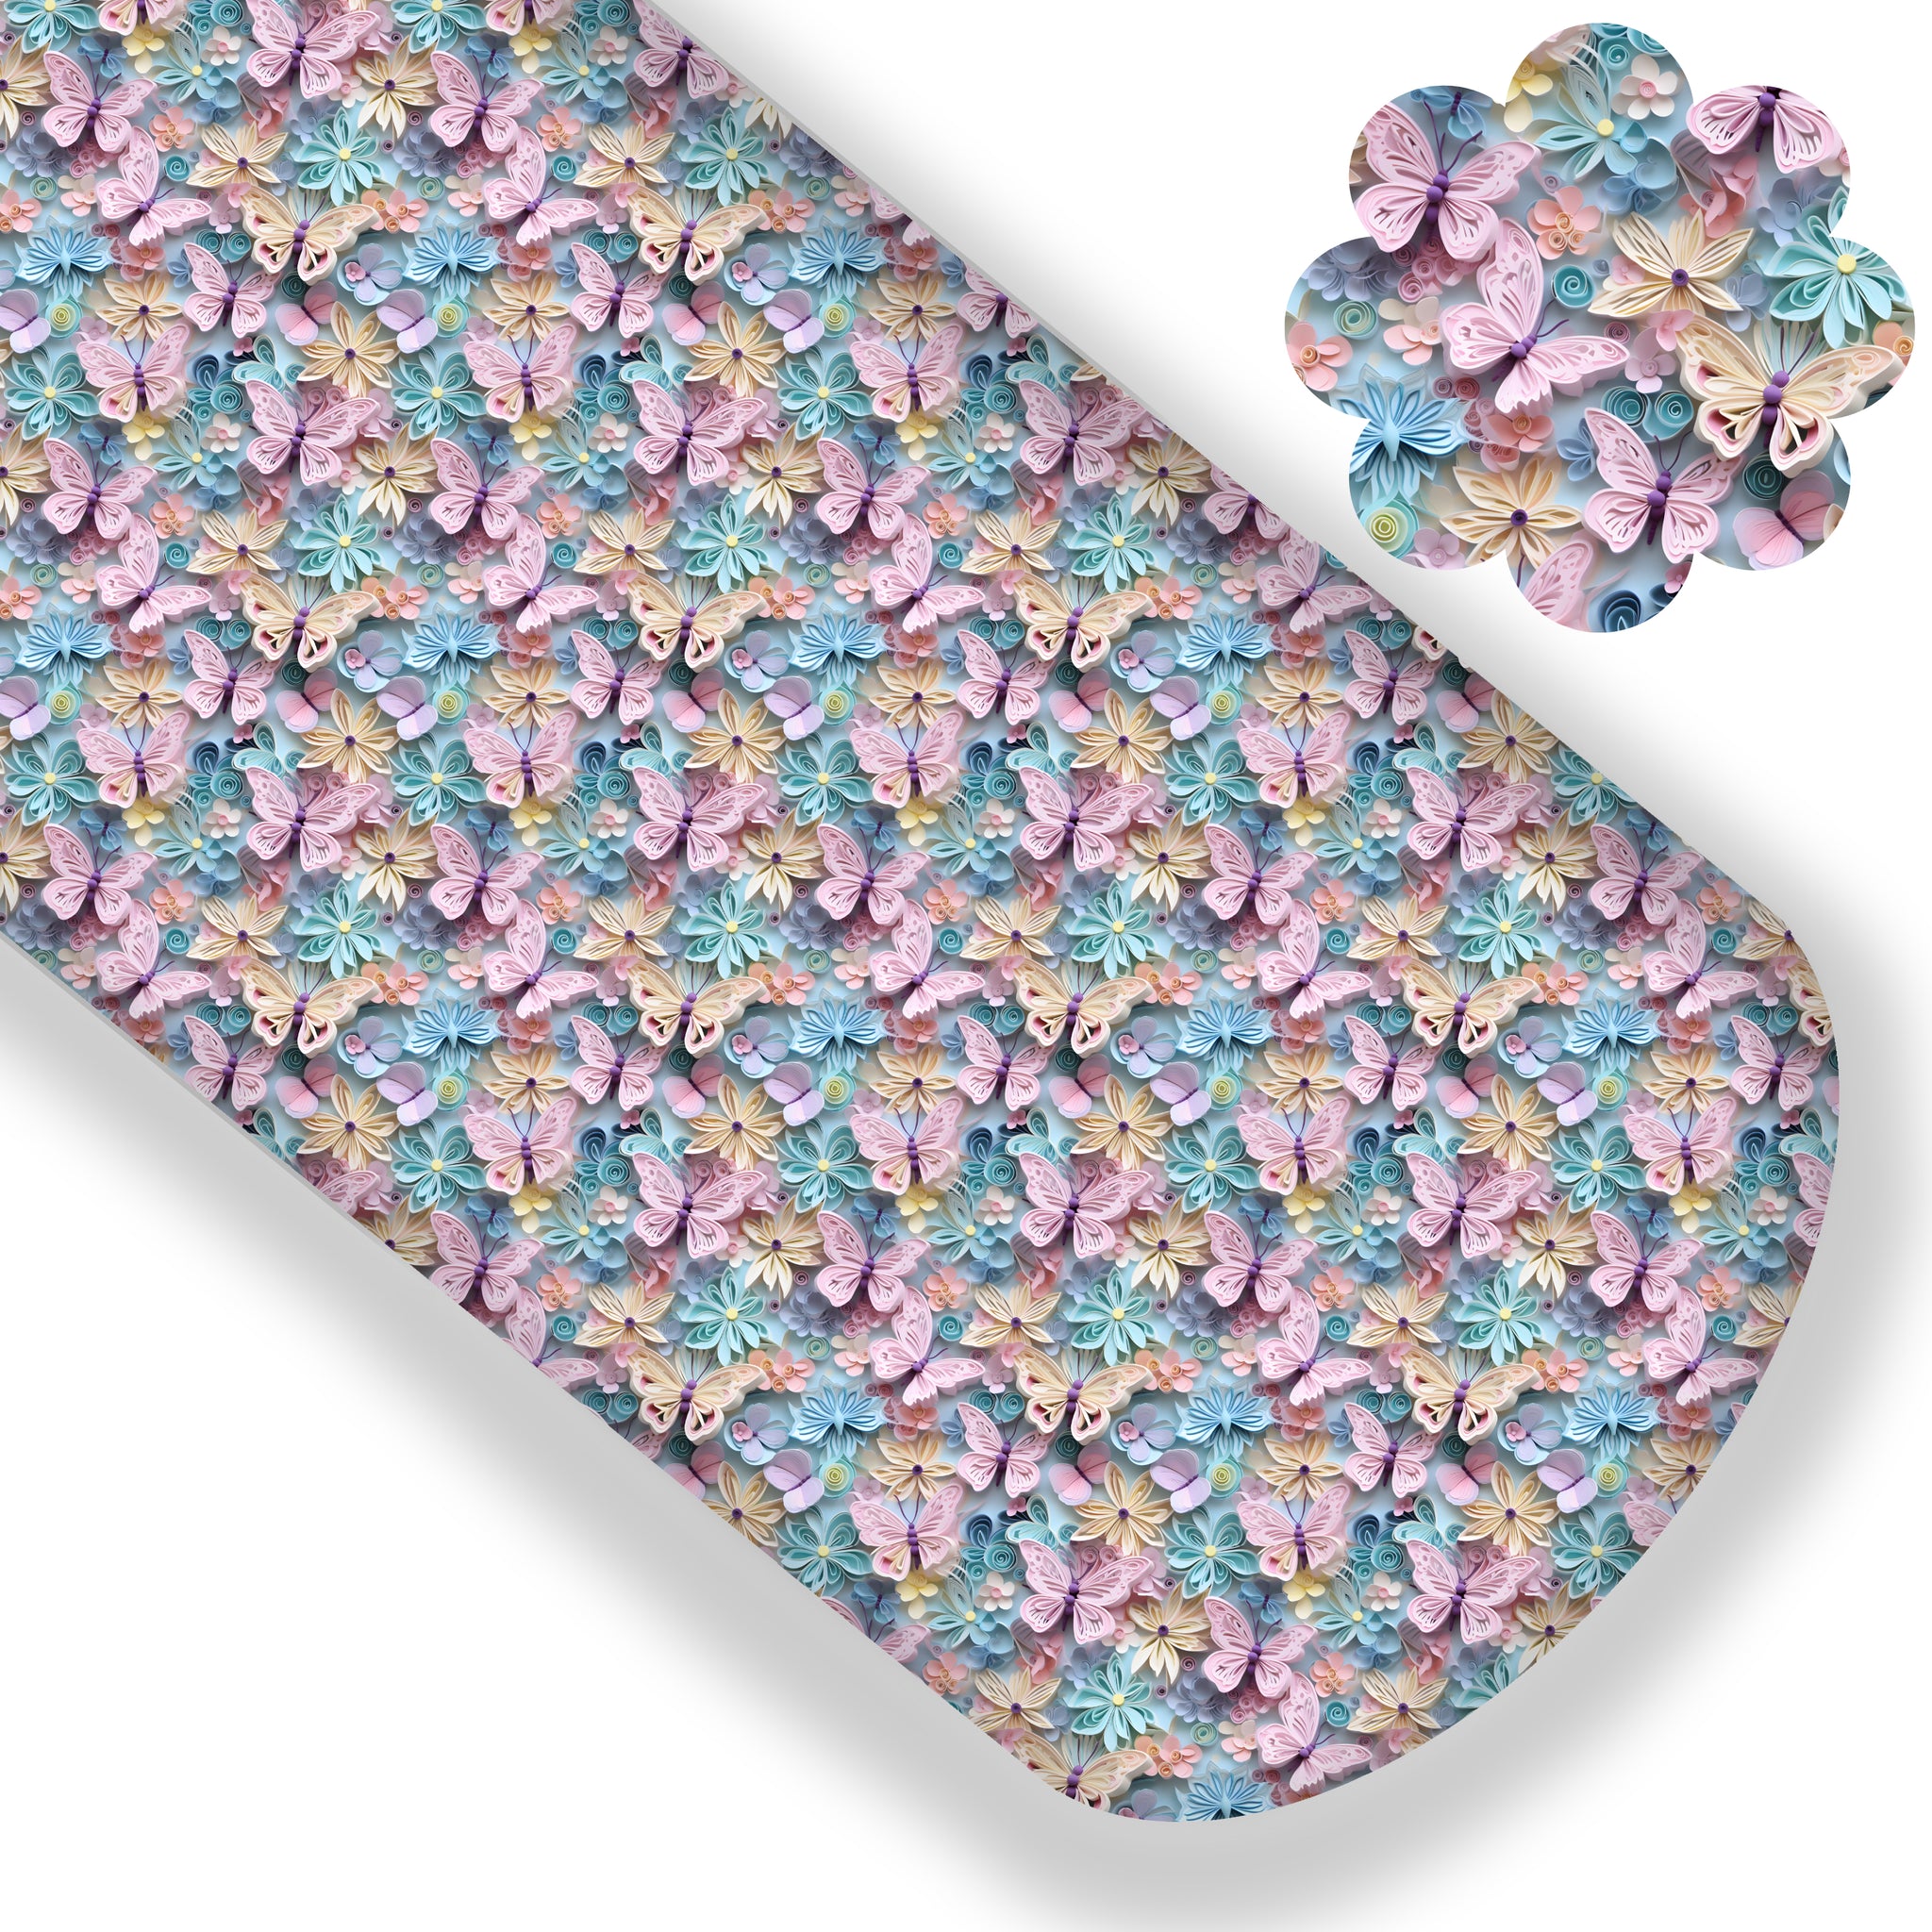 **READY TO SHIP!** "3D" Pastel Spring Butterfly Floral Premium Faux Leather